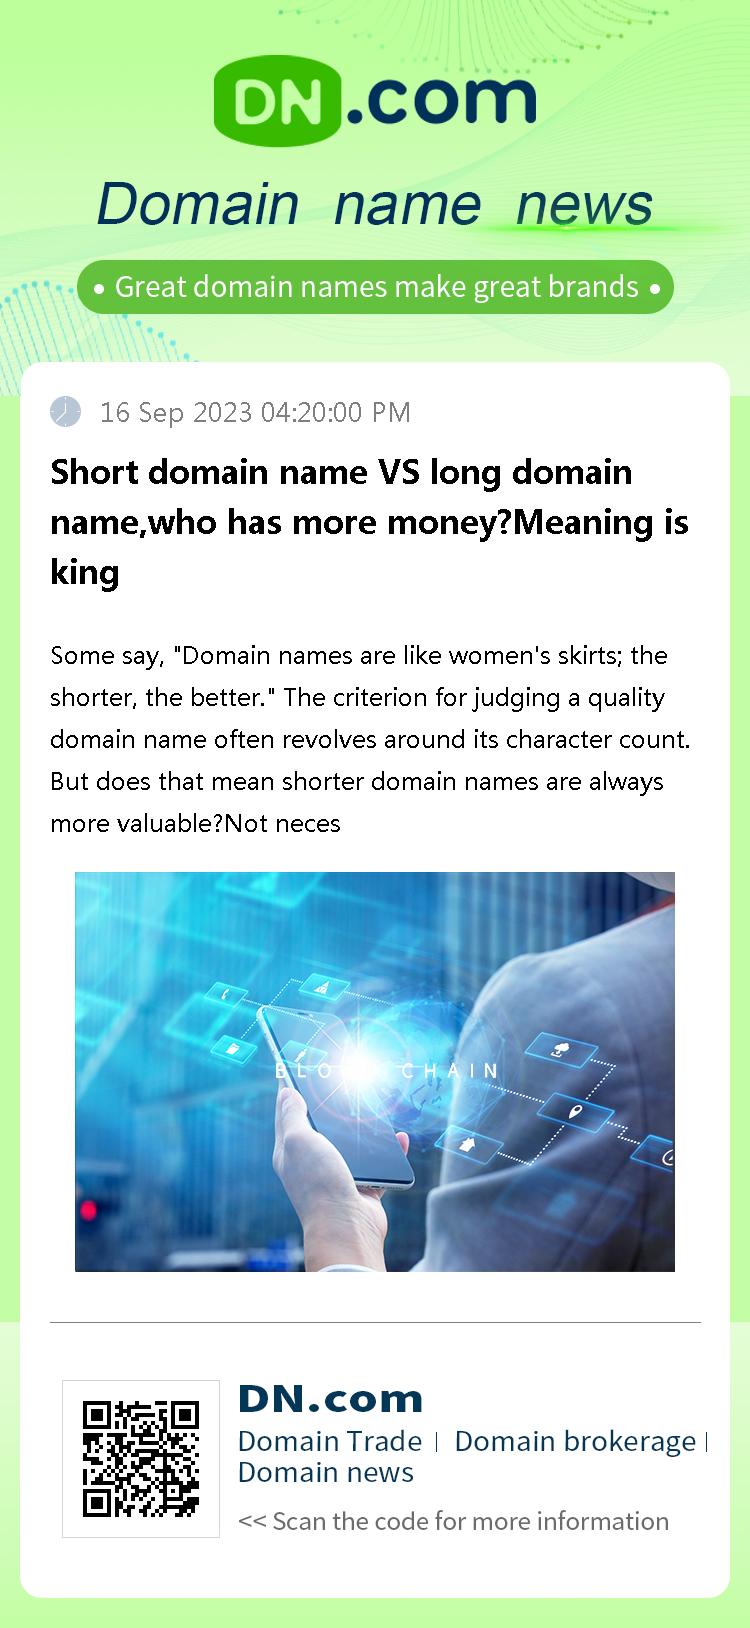 Short domain name VS long domain name,who has more money?Meaning is king